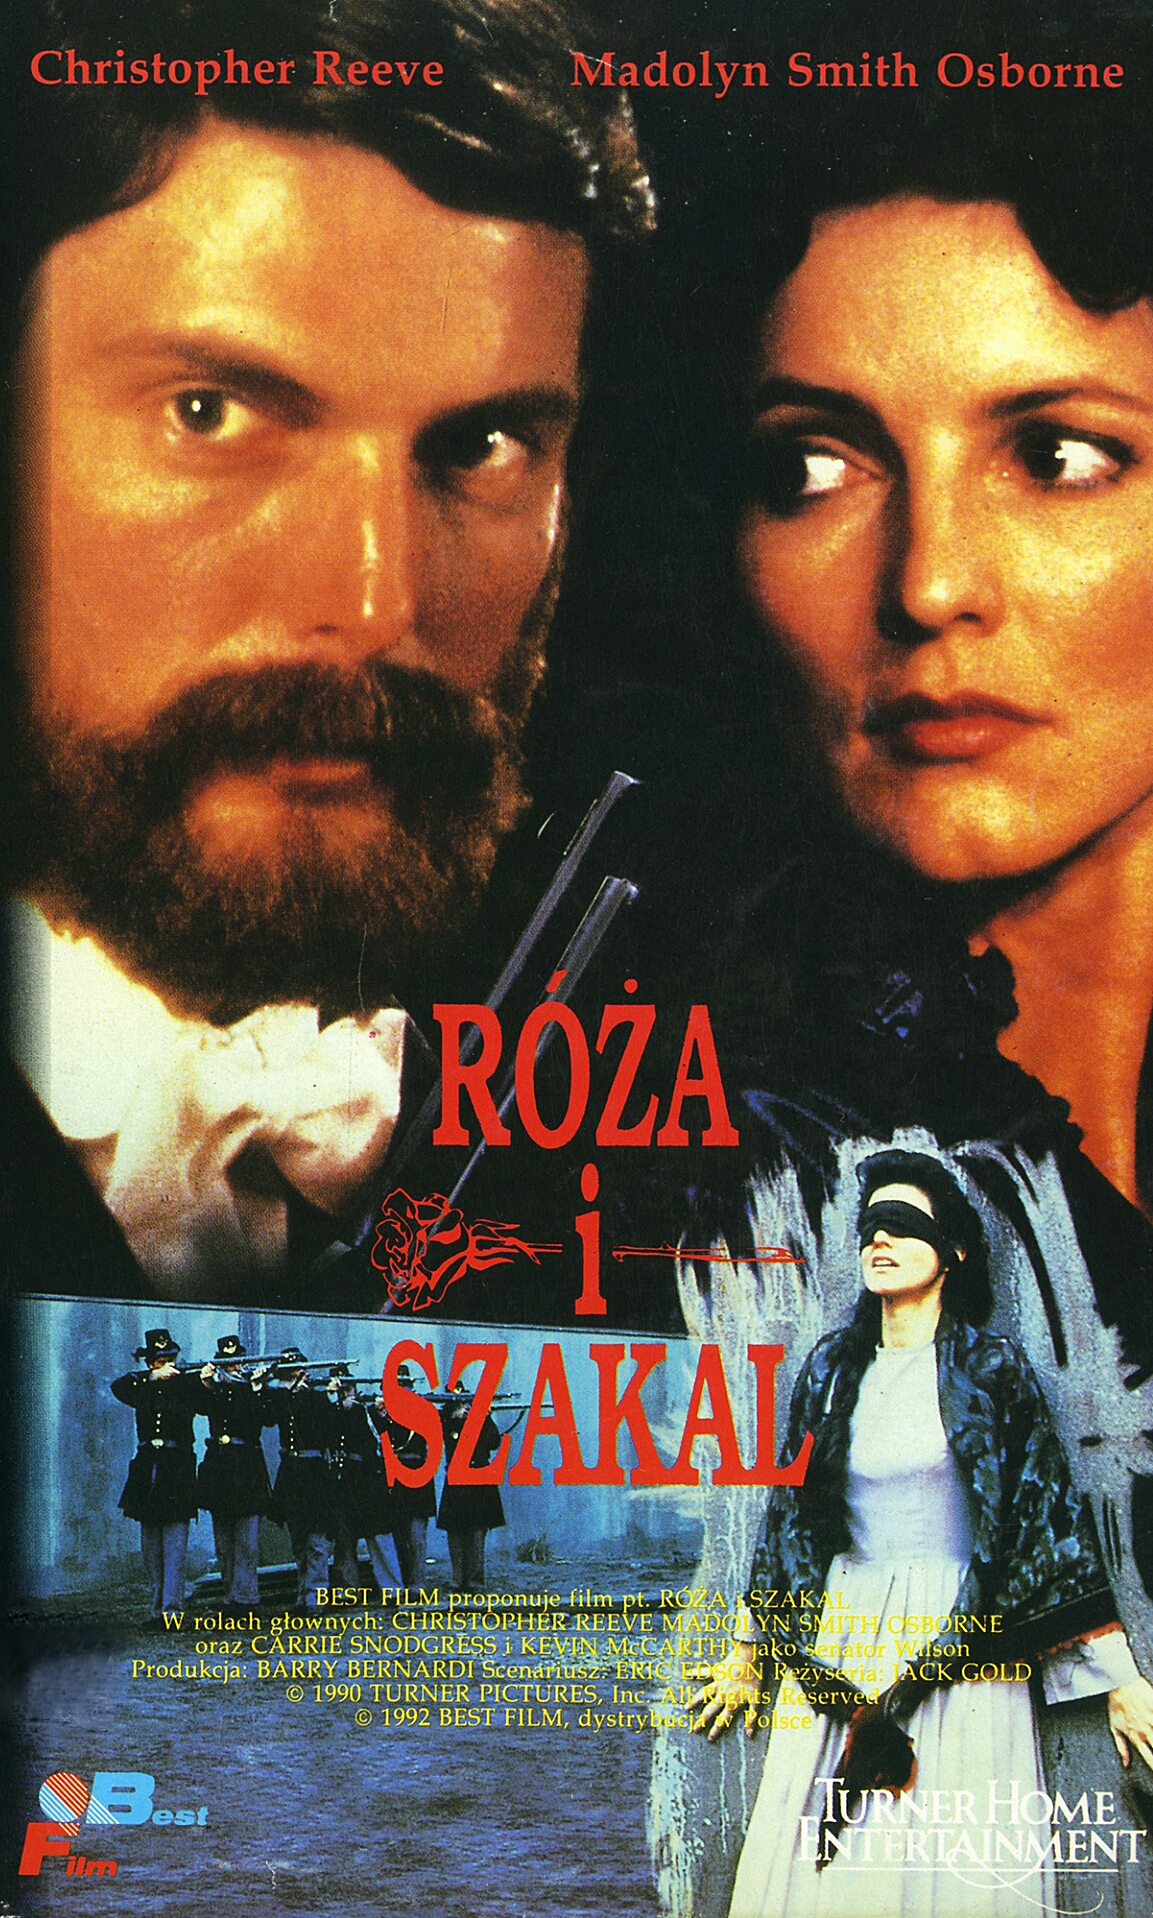 The Rose and the Jackal (1990) Screenshot 3